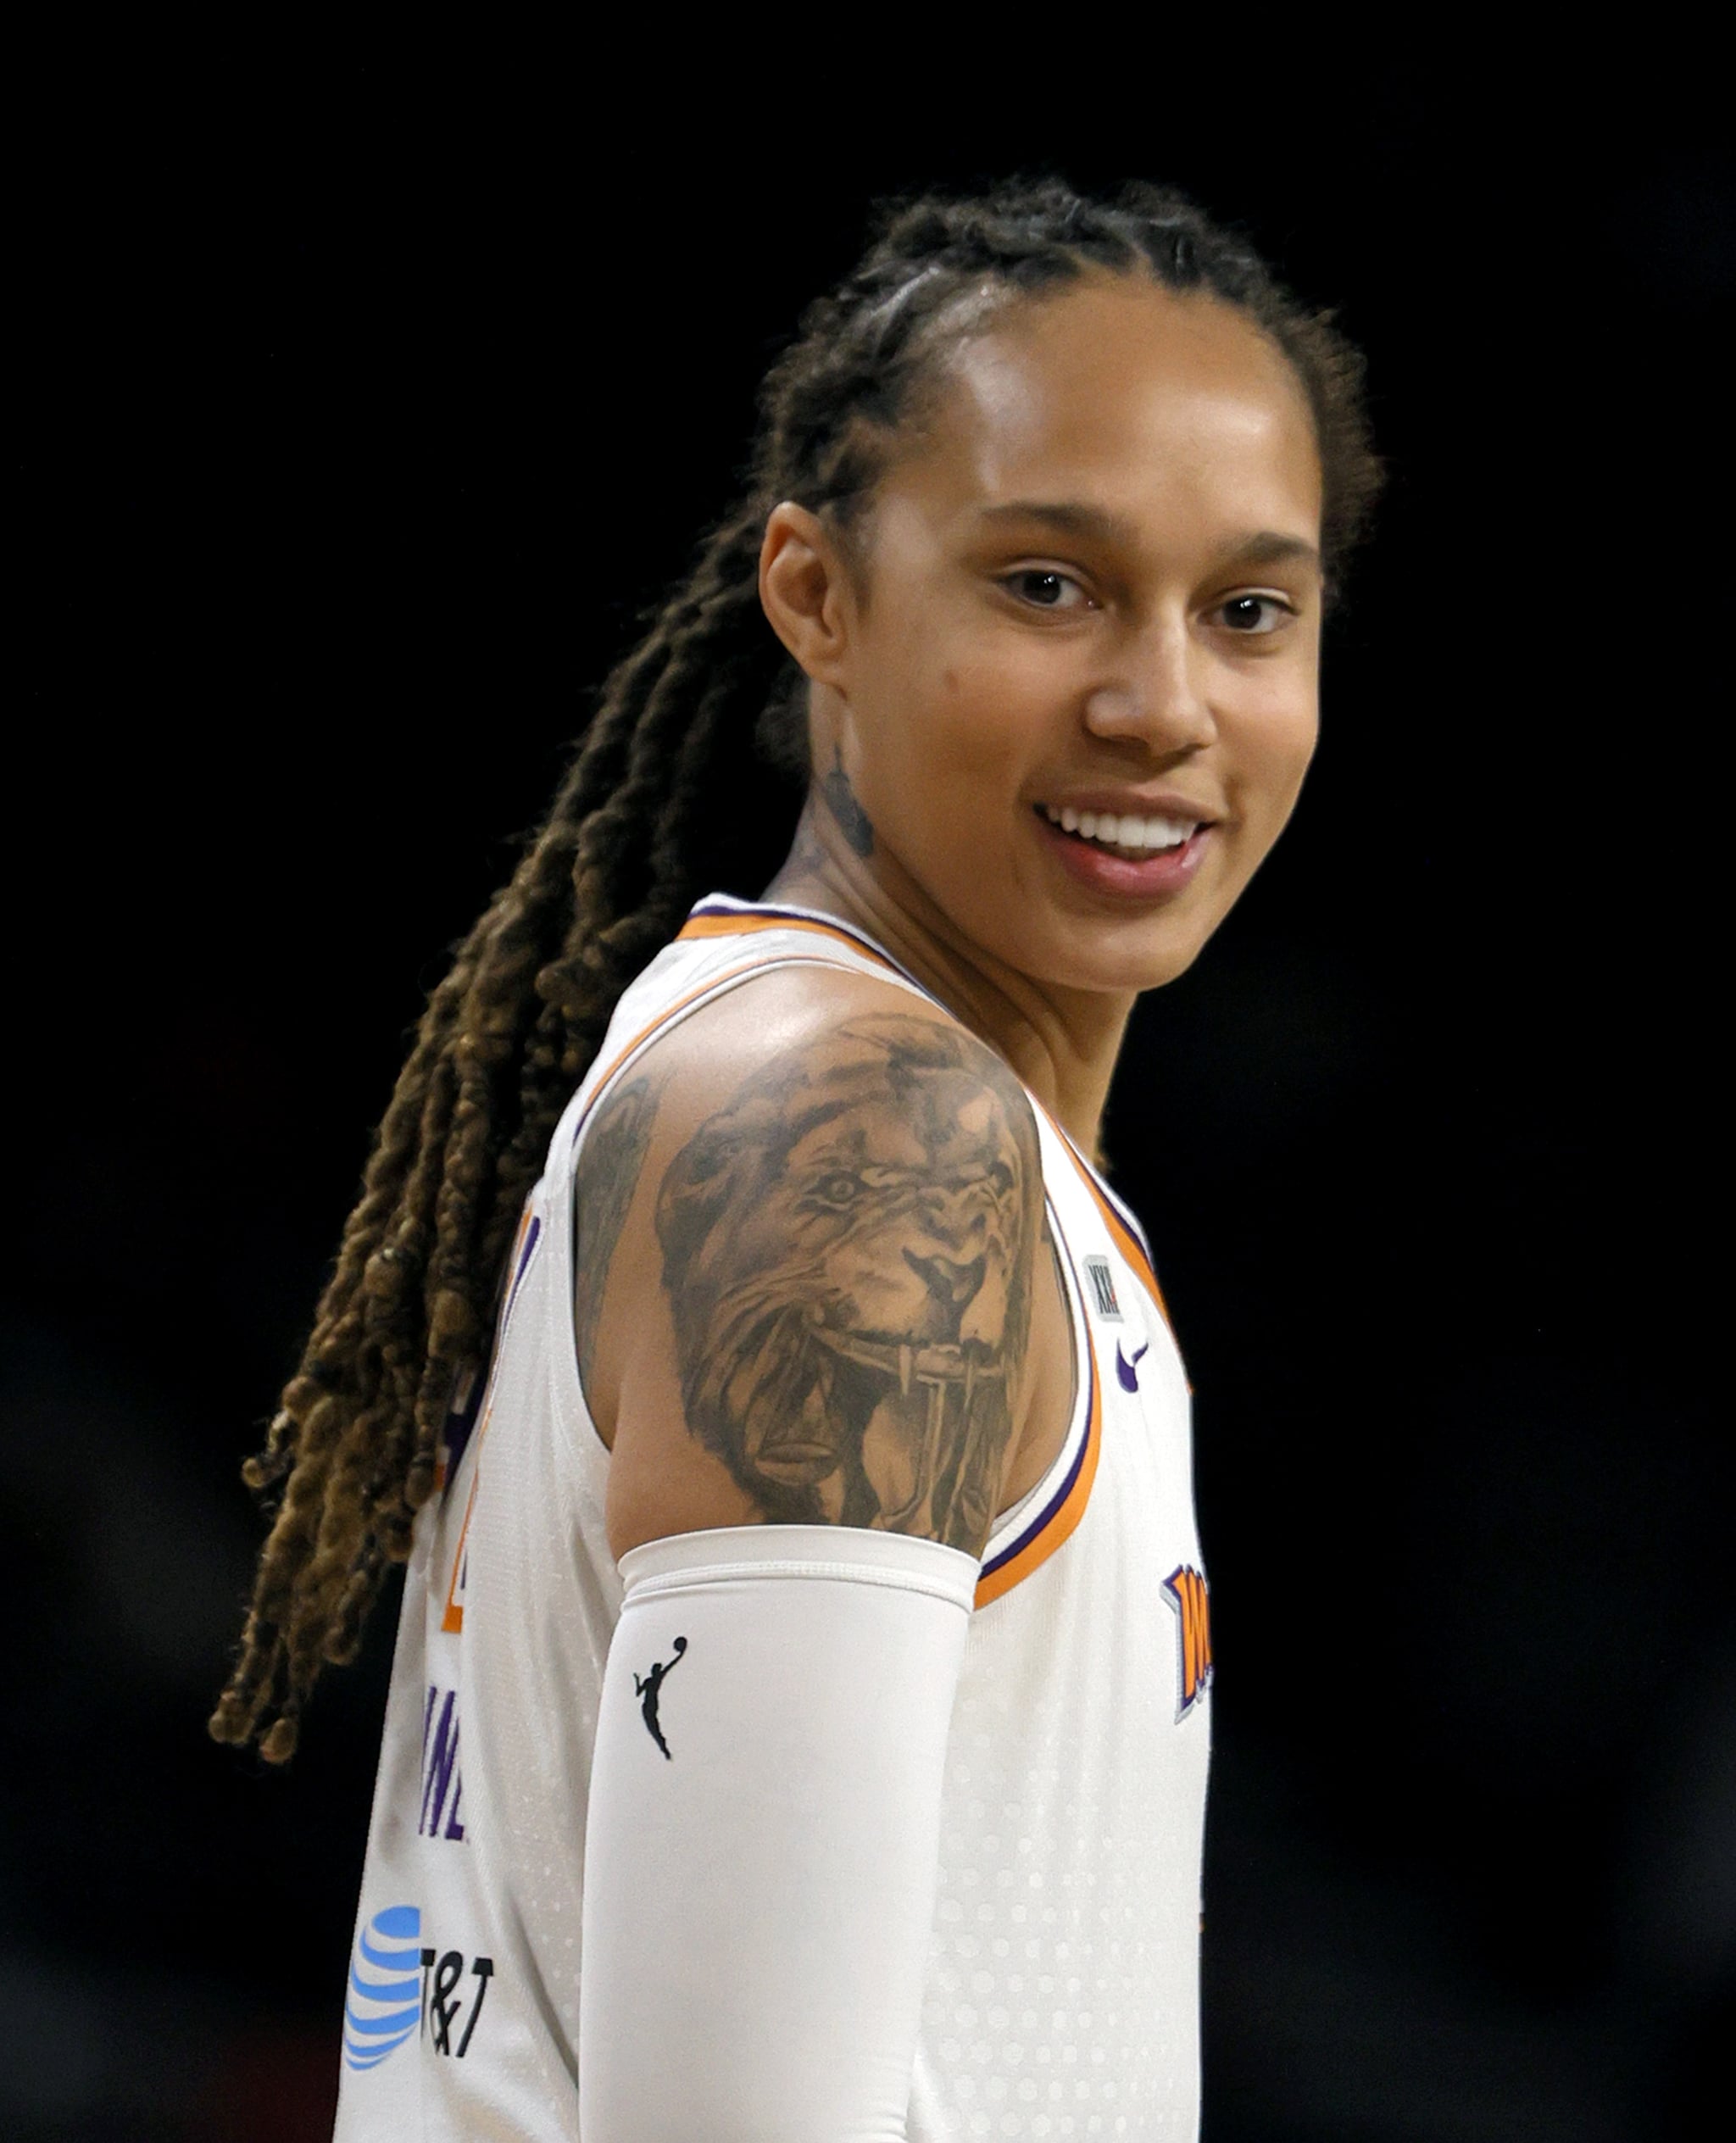 LAS VEGAS, NEVADA - SEPTEMBER 30:  Brittney Griner #42 of the Phoenix Mercury smiles before Game Two of the 2021 WNBA Playoffs semifinals against the Las Vegas Aces at Michelob ULTRA Arena on September 30, 2021 in Las Vegas, Nevada. The Mercury defeated the Aces 117-91. NOTE TO USER: User expressly acknowledges and agrees that, by downloading and or using this photograph, User is consenting to the terms and conditions of the Getty Images Licence Agreement.  (Photo by Ethan Miller/Getty Images)